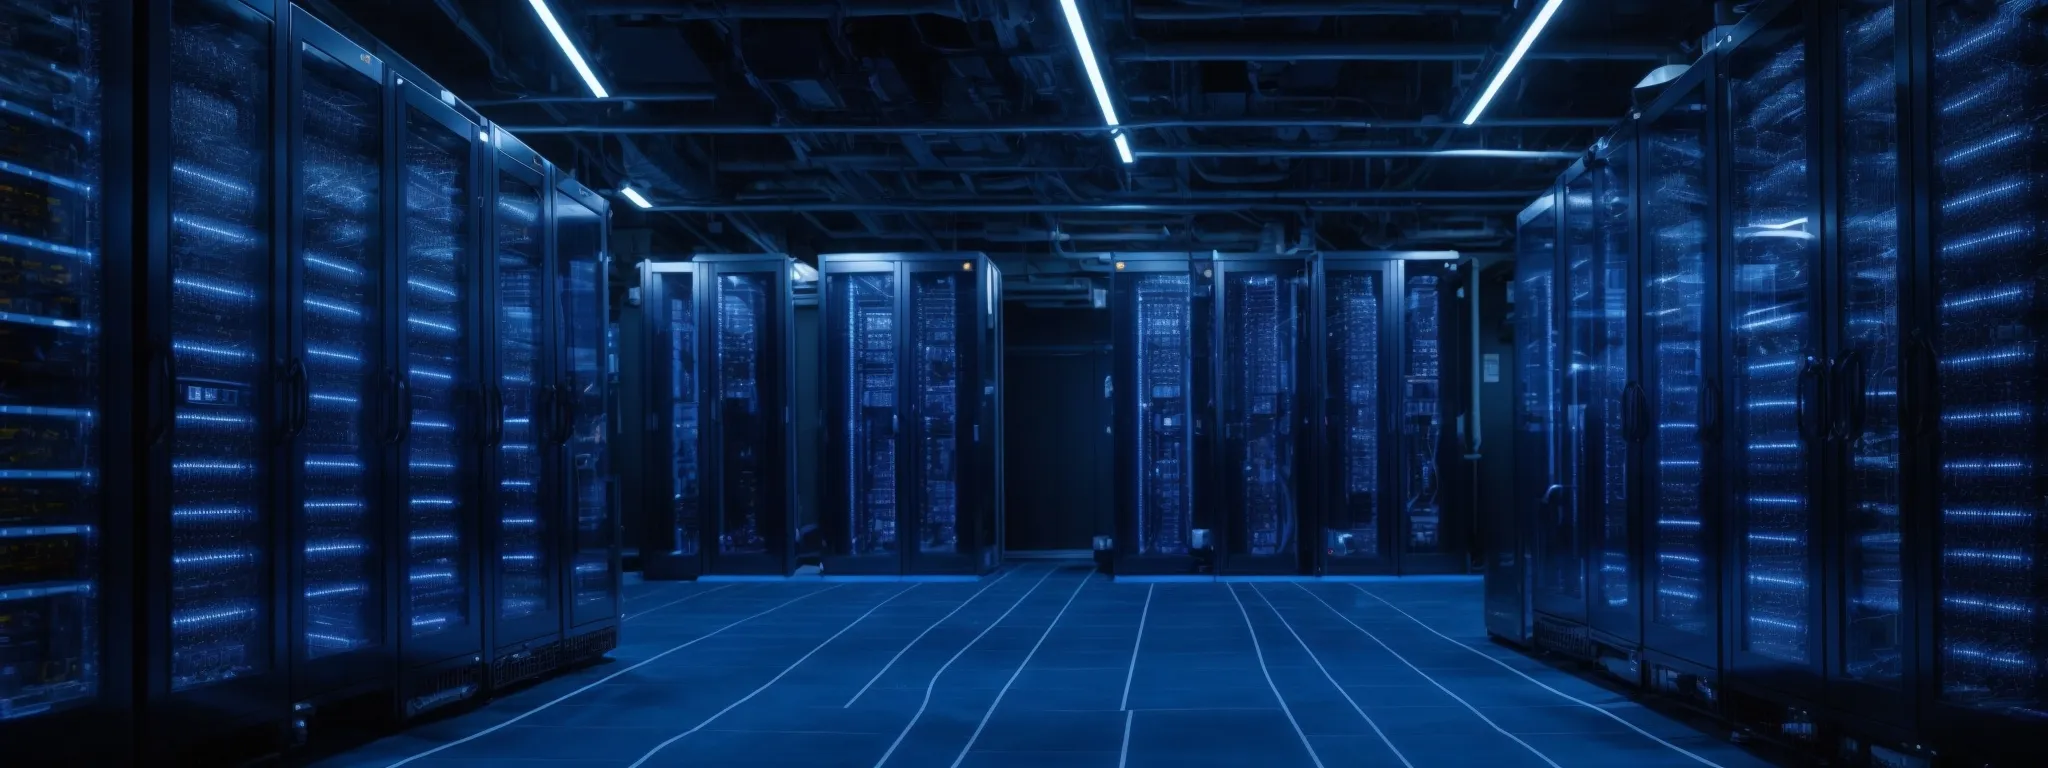 rows of server racks in a data center illuminated by blue led lights, symbolizing advanced technology and data processing in seo's future.